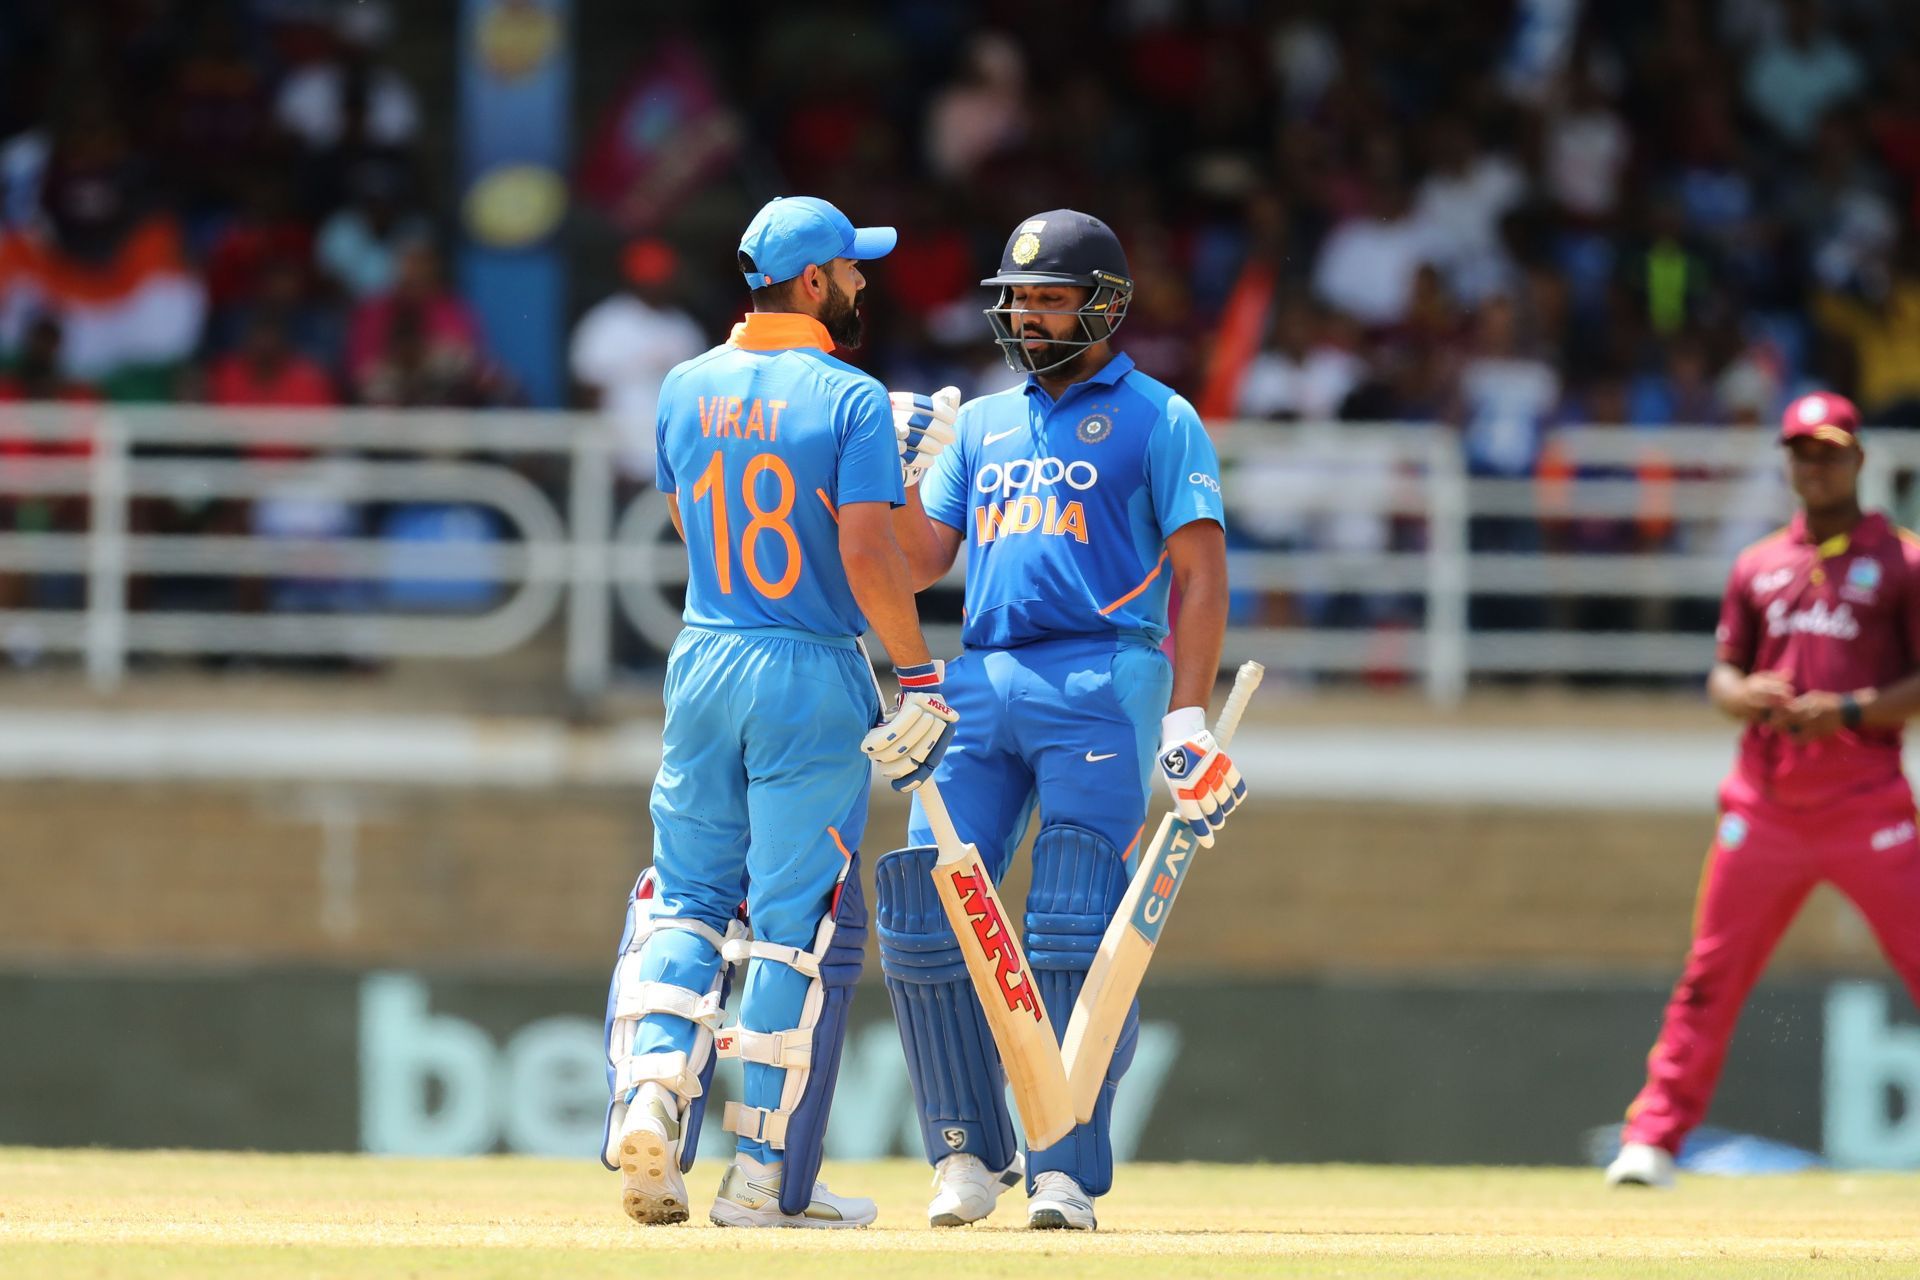 Virat Kohli and Rohit Sharma are two of the best batters in the world right now